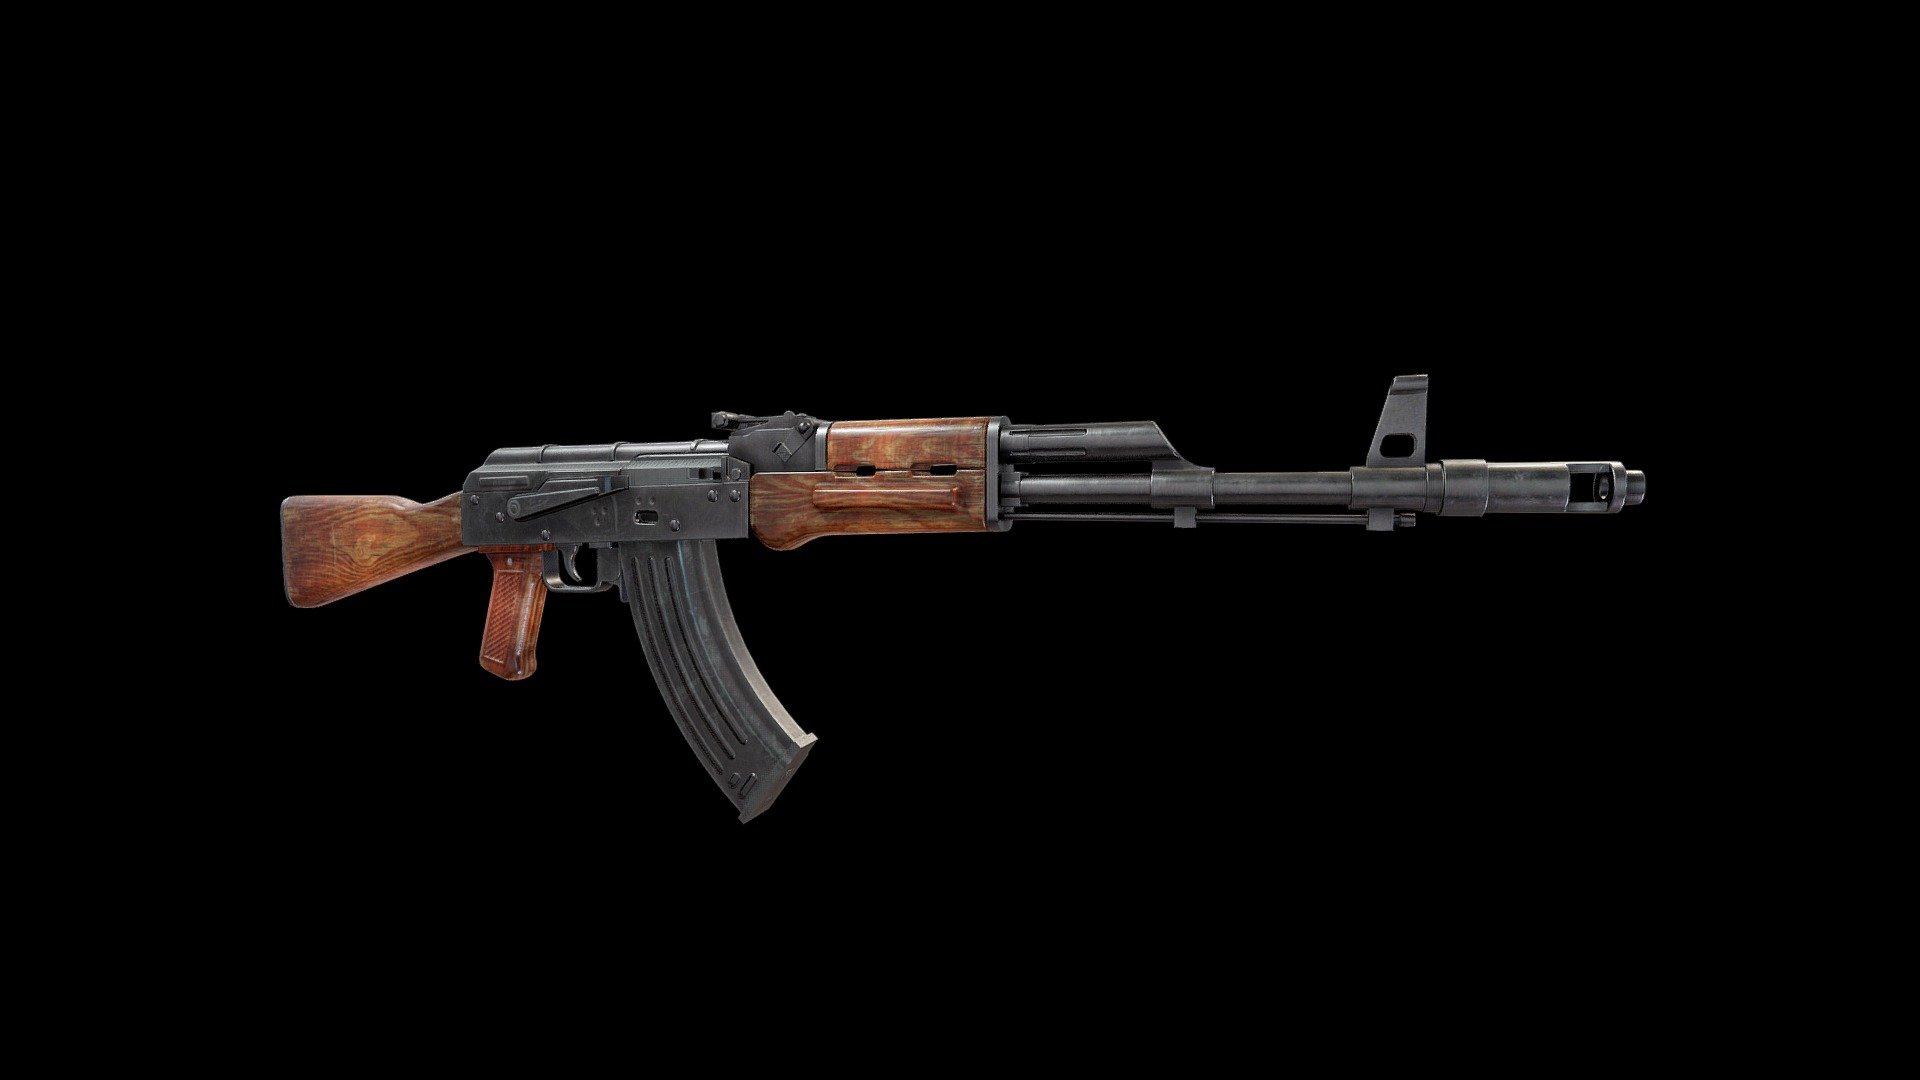 AK-74 game ready - 3D model by gus_thewise [67ffbe8] - Sketchfab